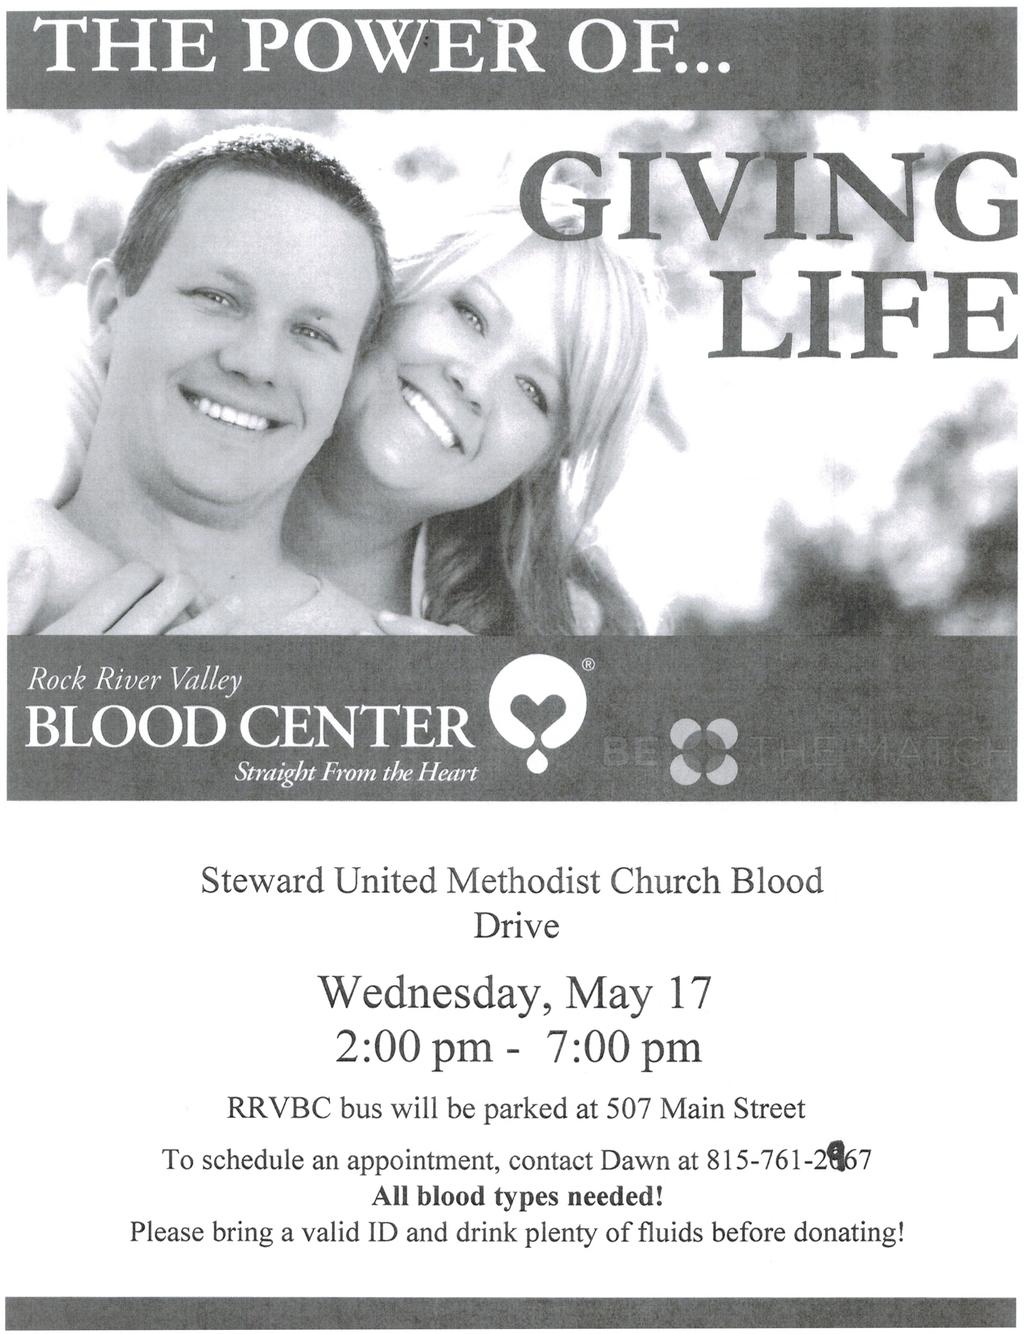 Steward United Methodist Church Blood Drive Wednesday, May 17 2:00pm- 7:00 pm RRVBC bus will be parked at 507 Main Street To